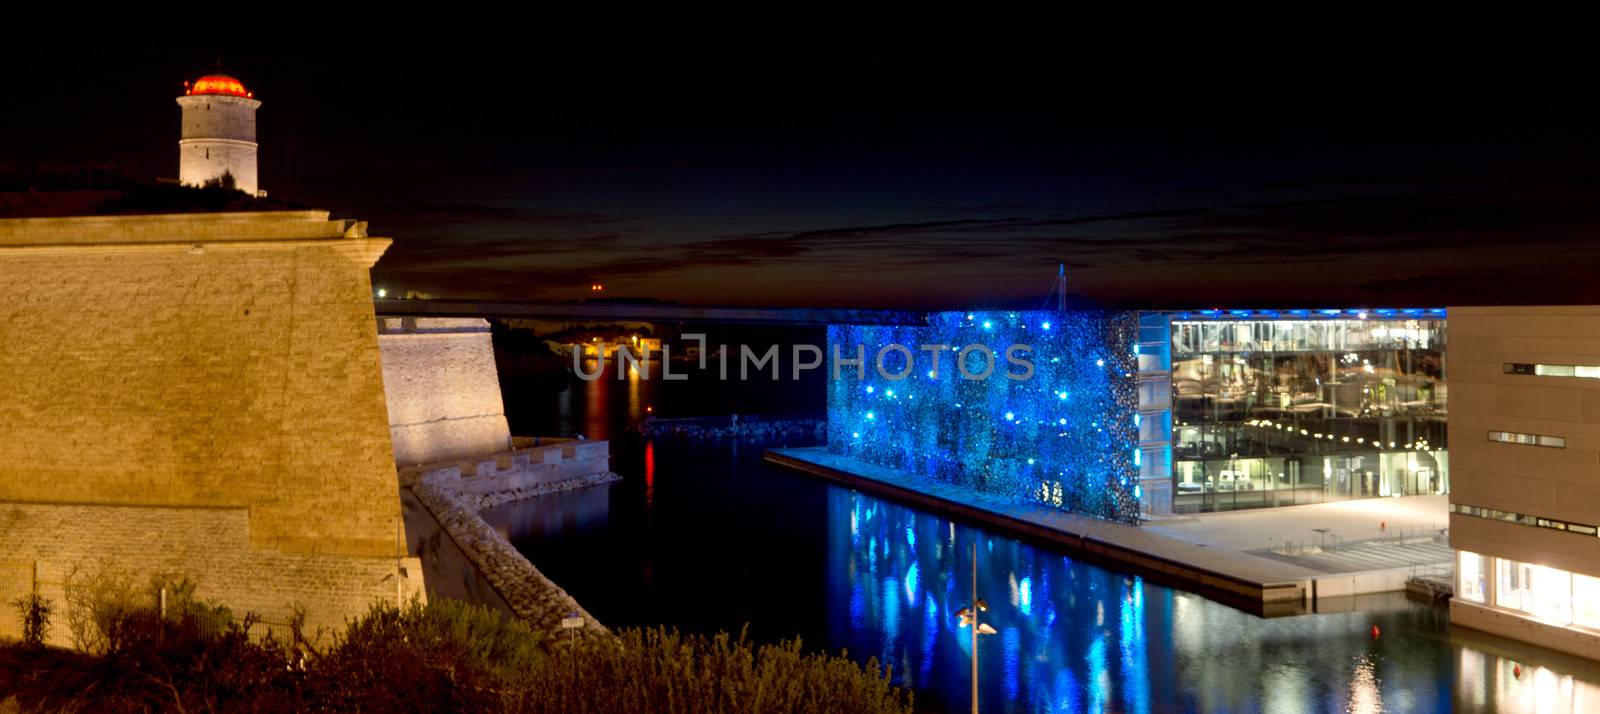 Marseille, France - 2013, November 2: A night view of the new revitalized area of the old port of Marseille. Next to the Fort St.-Jean, two of the new museums inaugurated this year for the Marseille European Capital of Culture 2013 event: the MuCEM and Villa Mediterranée.  On November 2013 in Marseille, France.